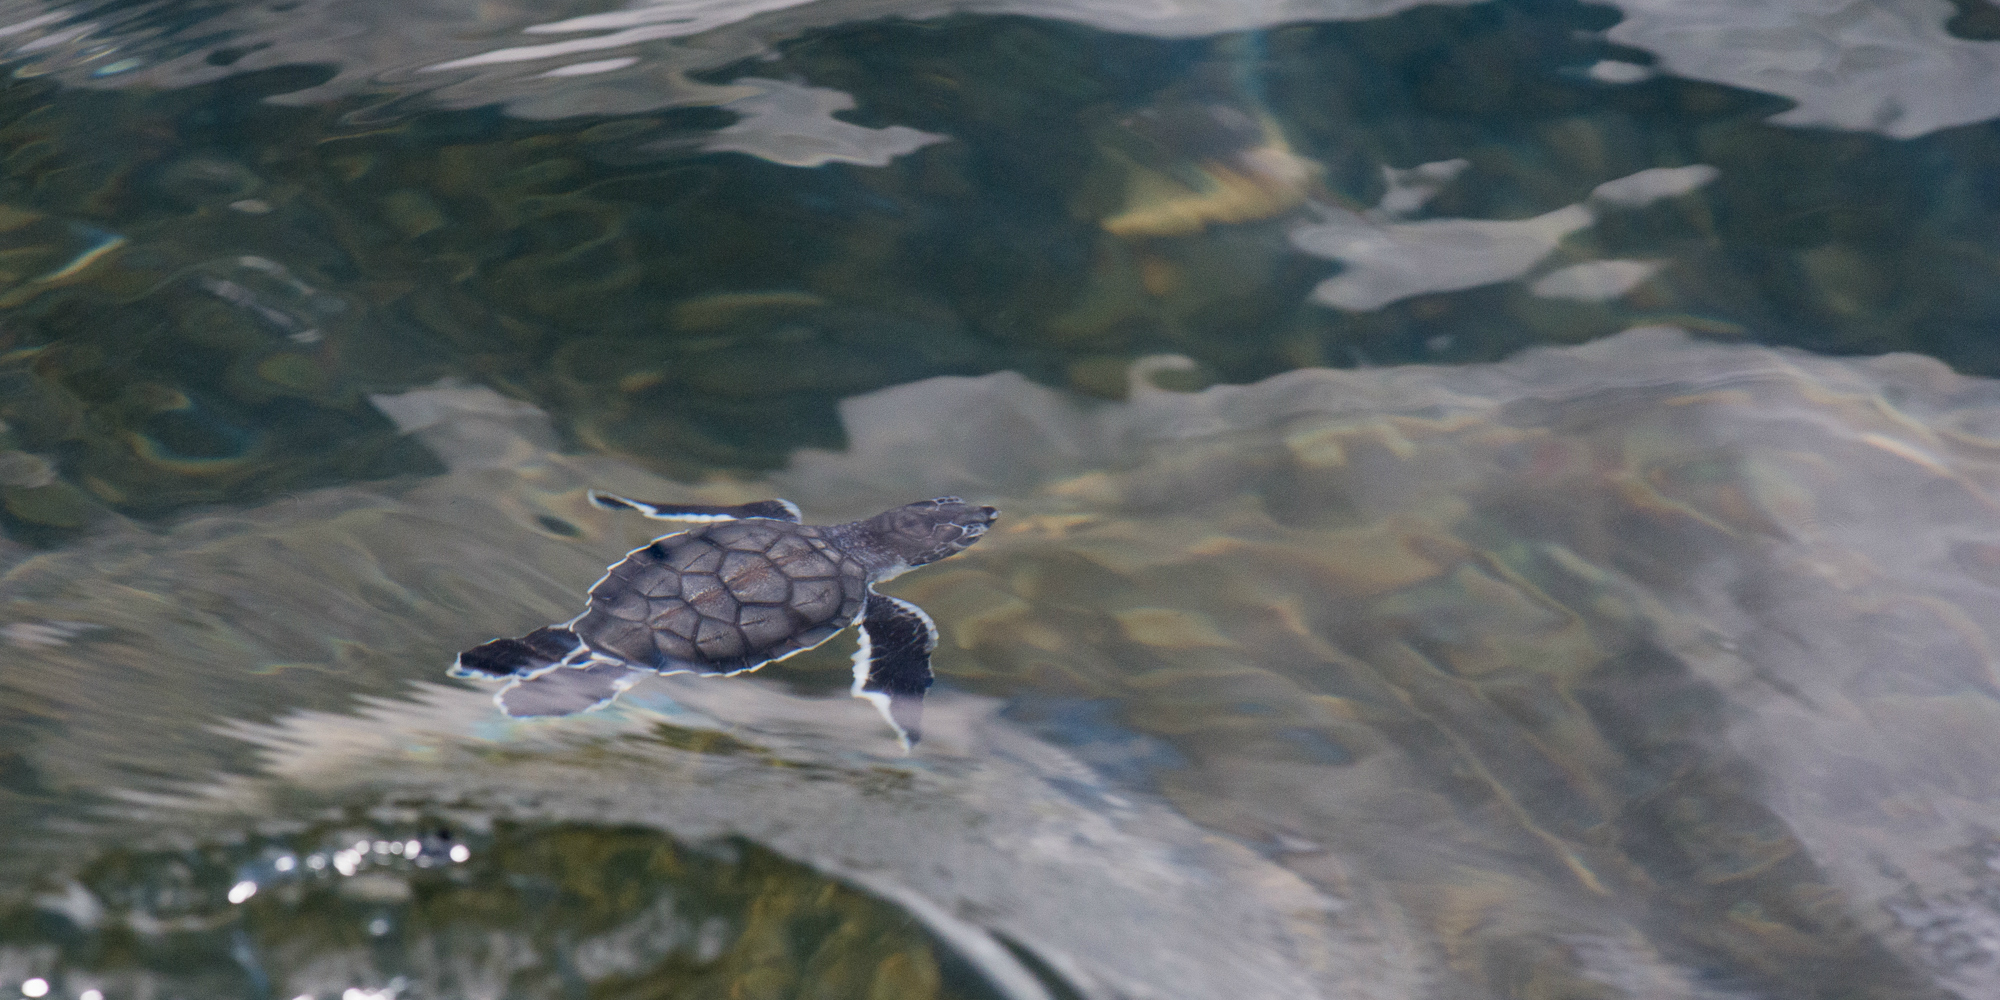 A turtle conservation volunteer spots this turtle hatching swim out from the shore.